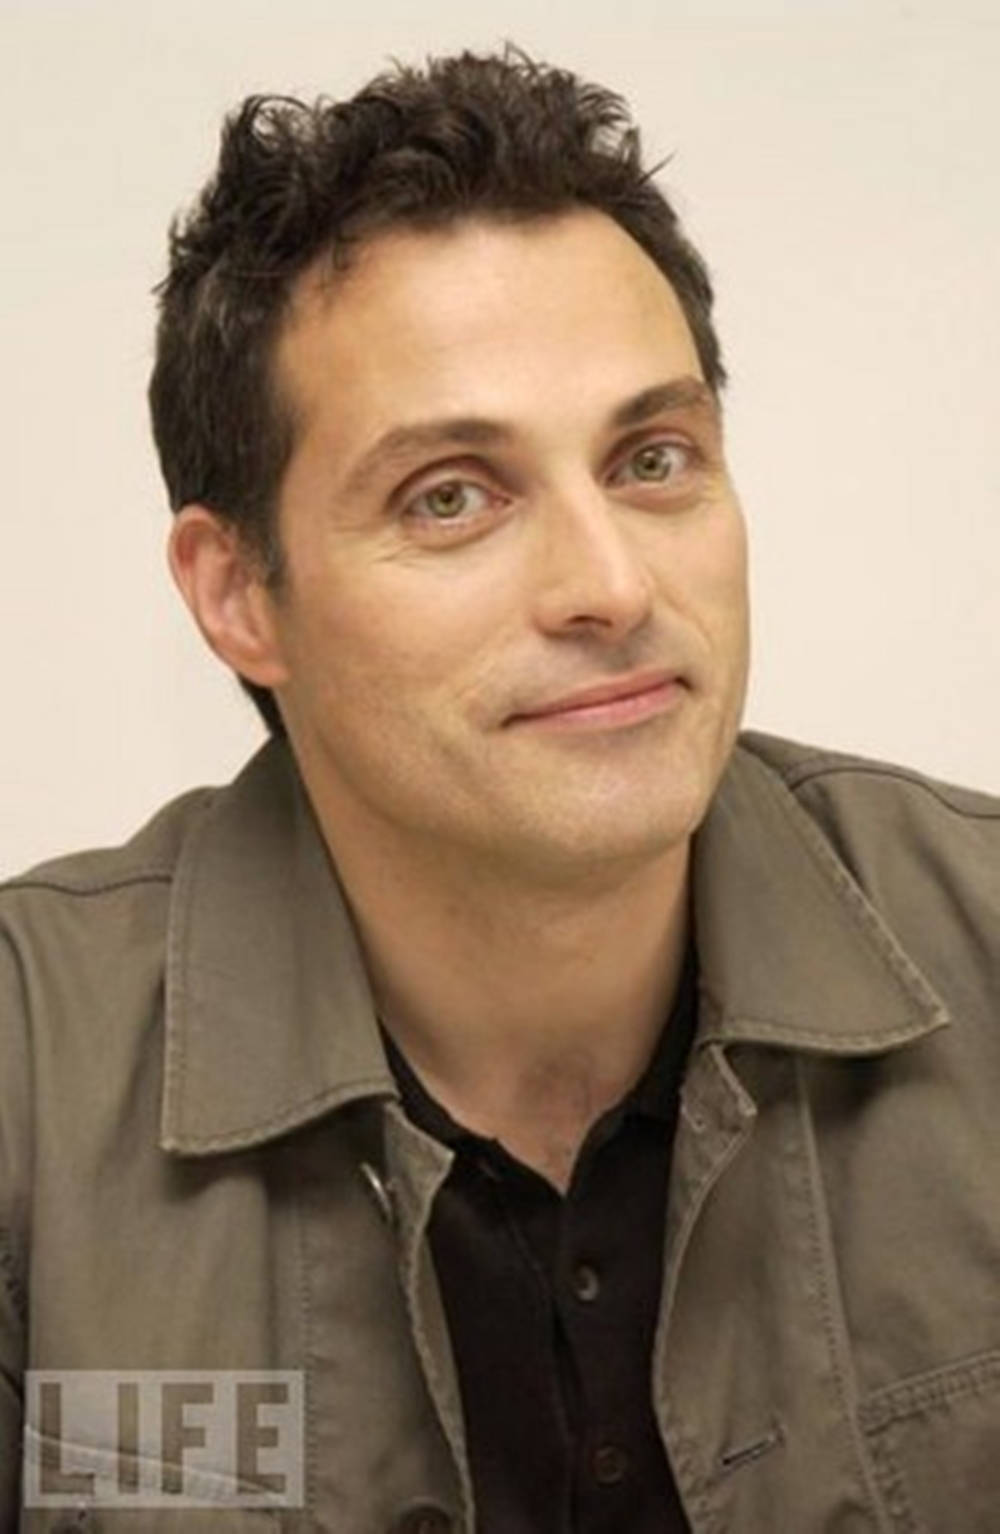 "Elegant and Charming Rufus Sewell, The Magnificent British Actor" Wallpaper